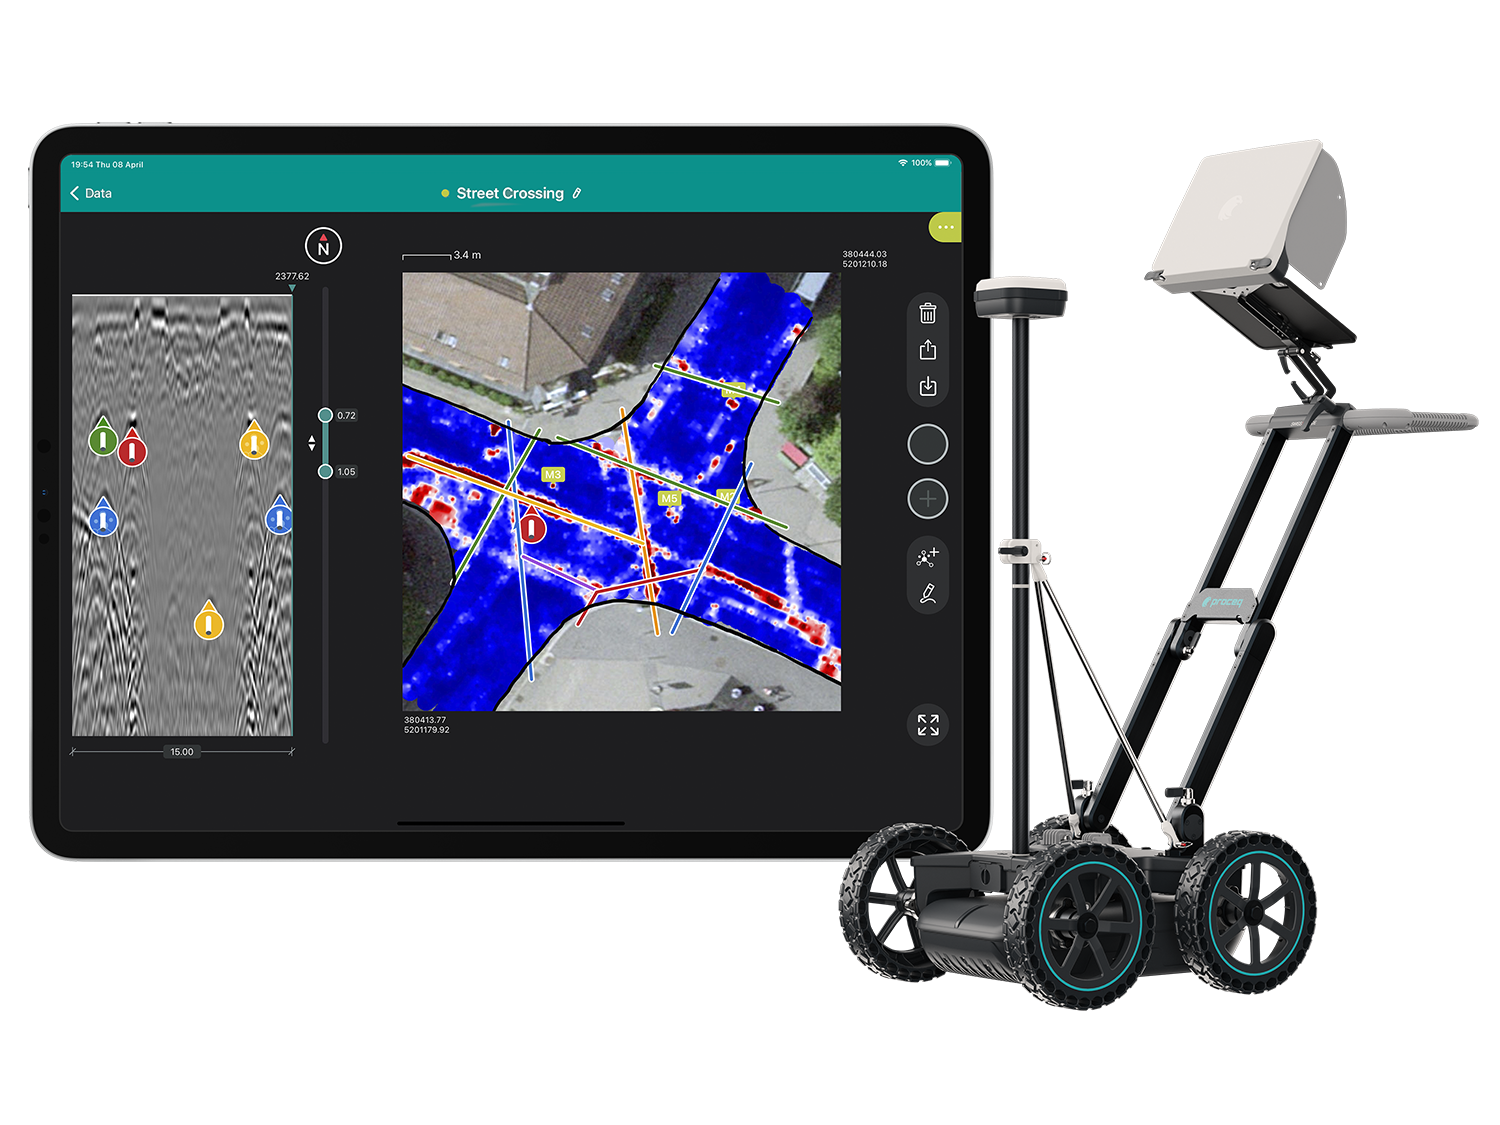 GS8000 subsurface mapping GPR